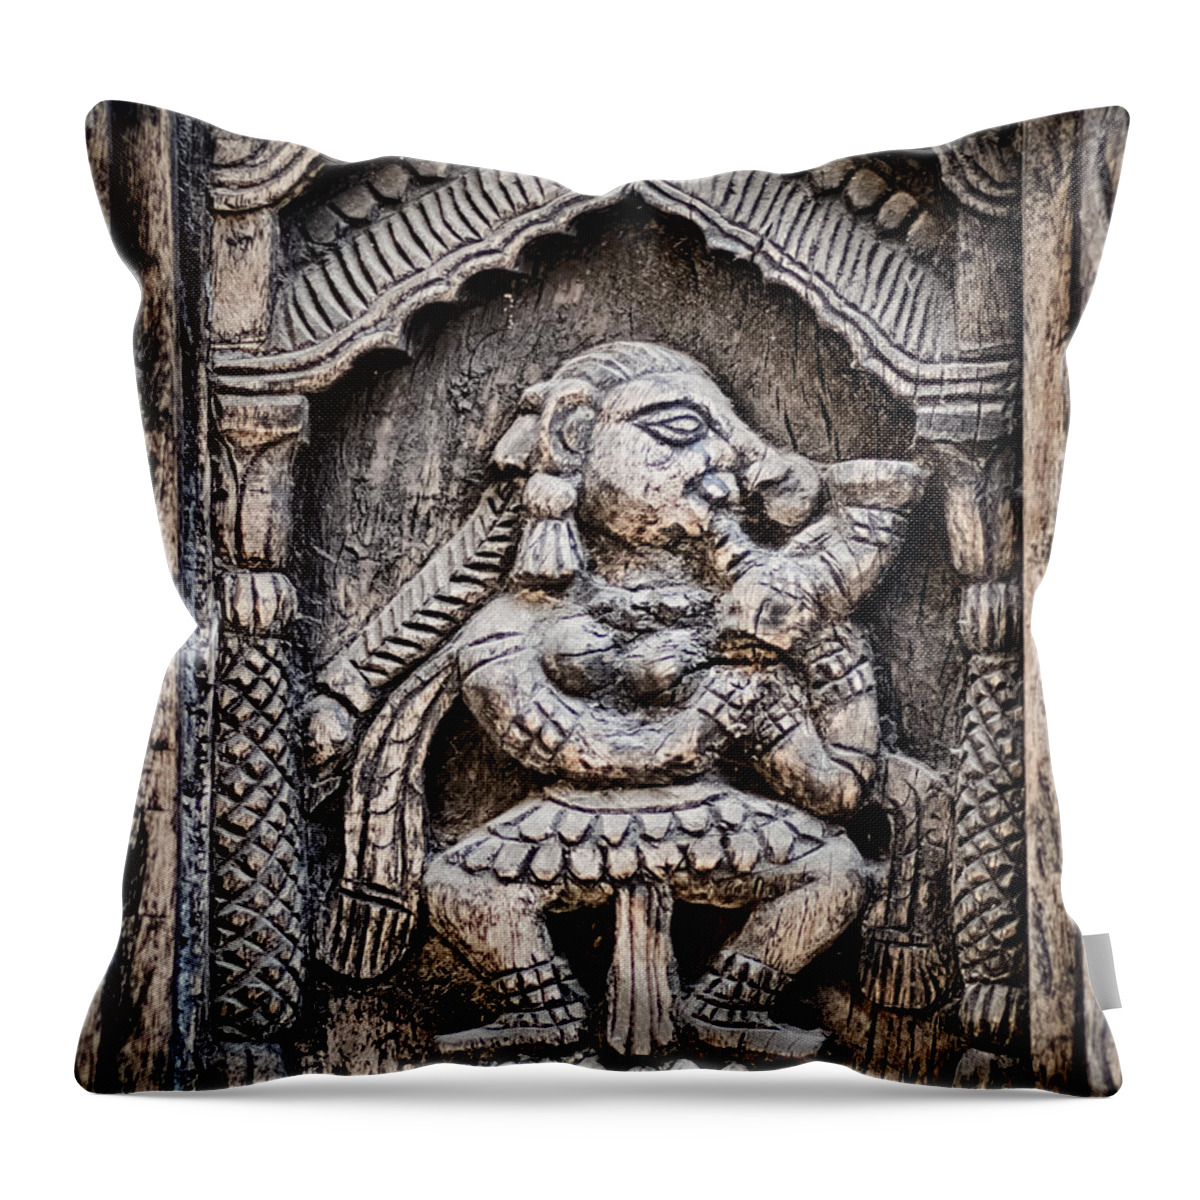 Historic Throw Pillow featuring the photograph Displayed by Scott Wyatt